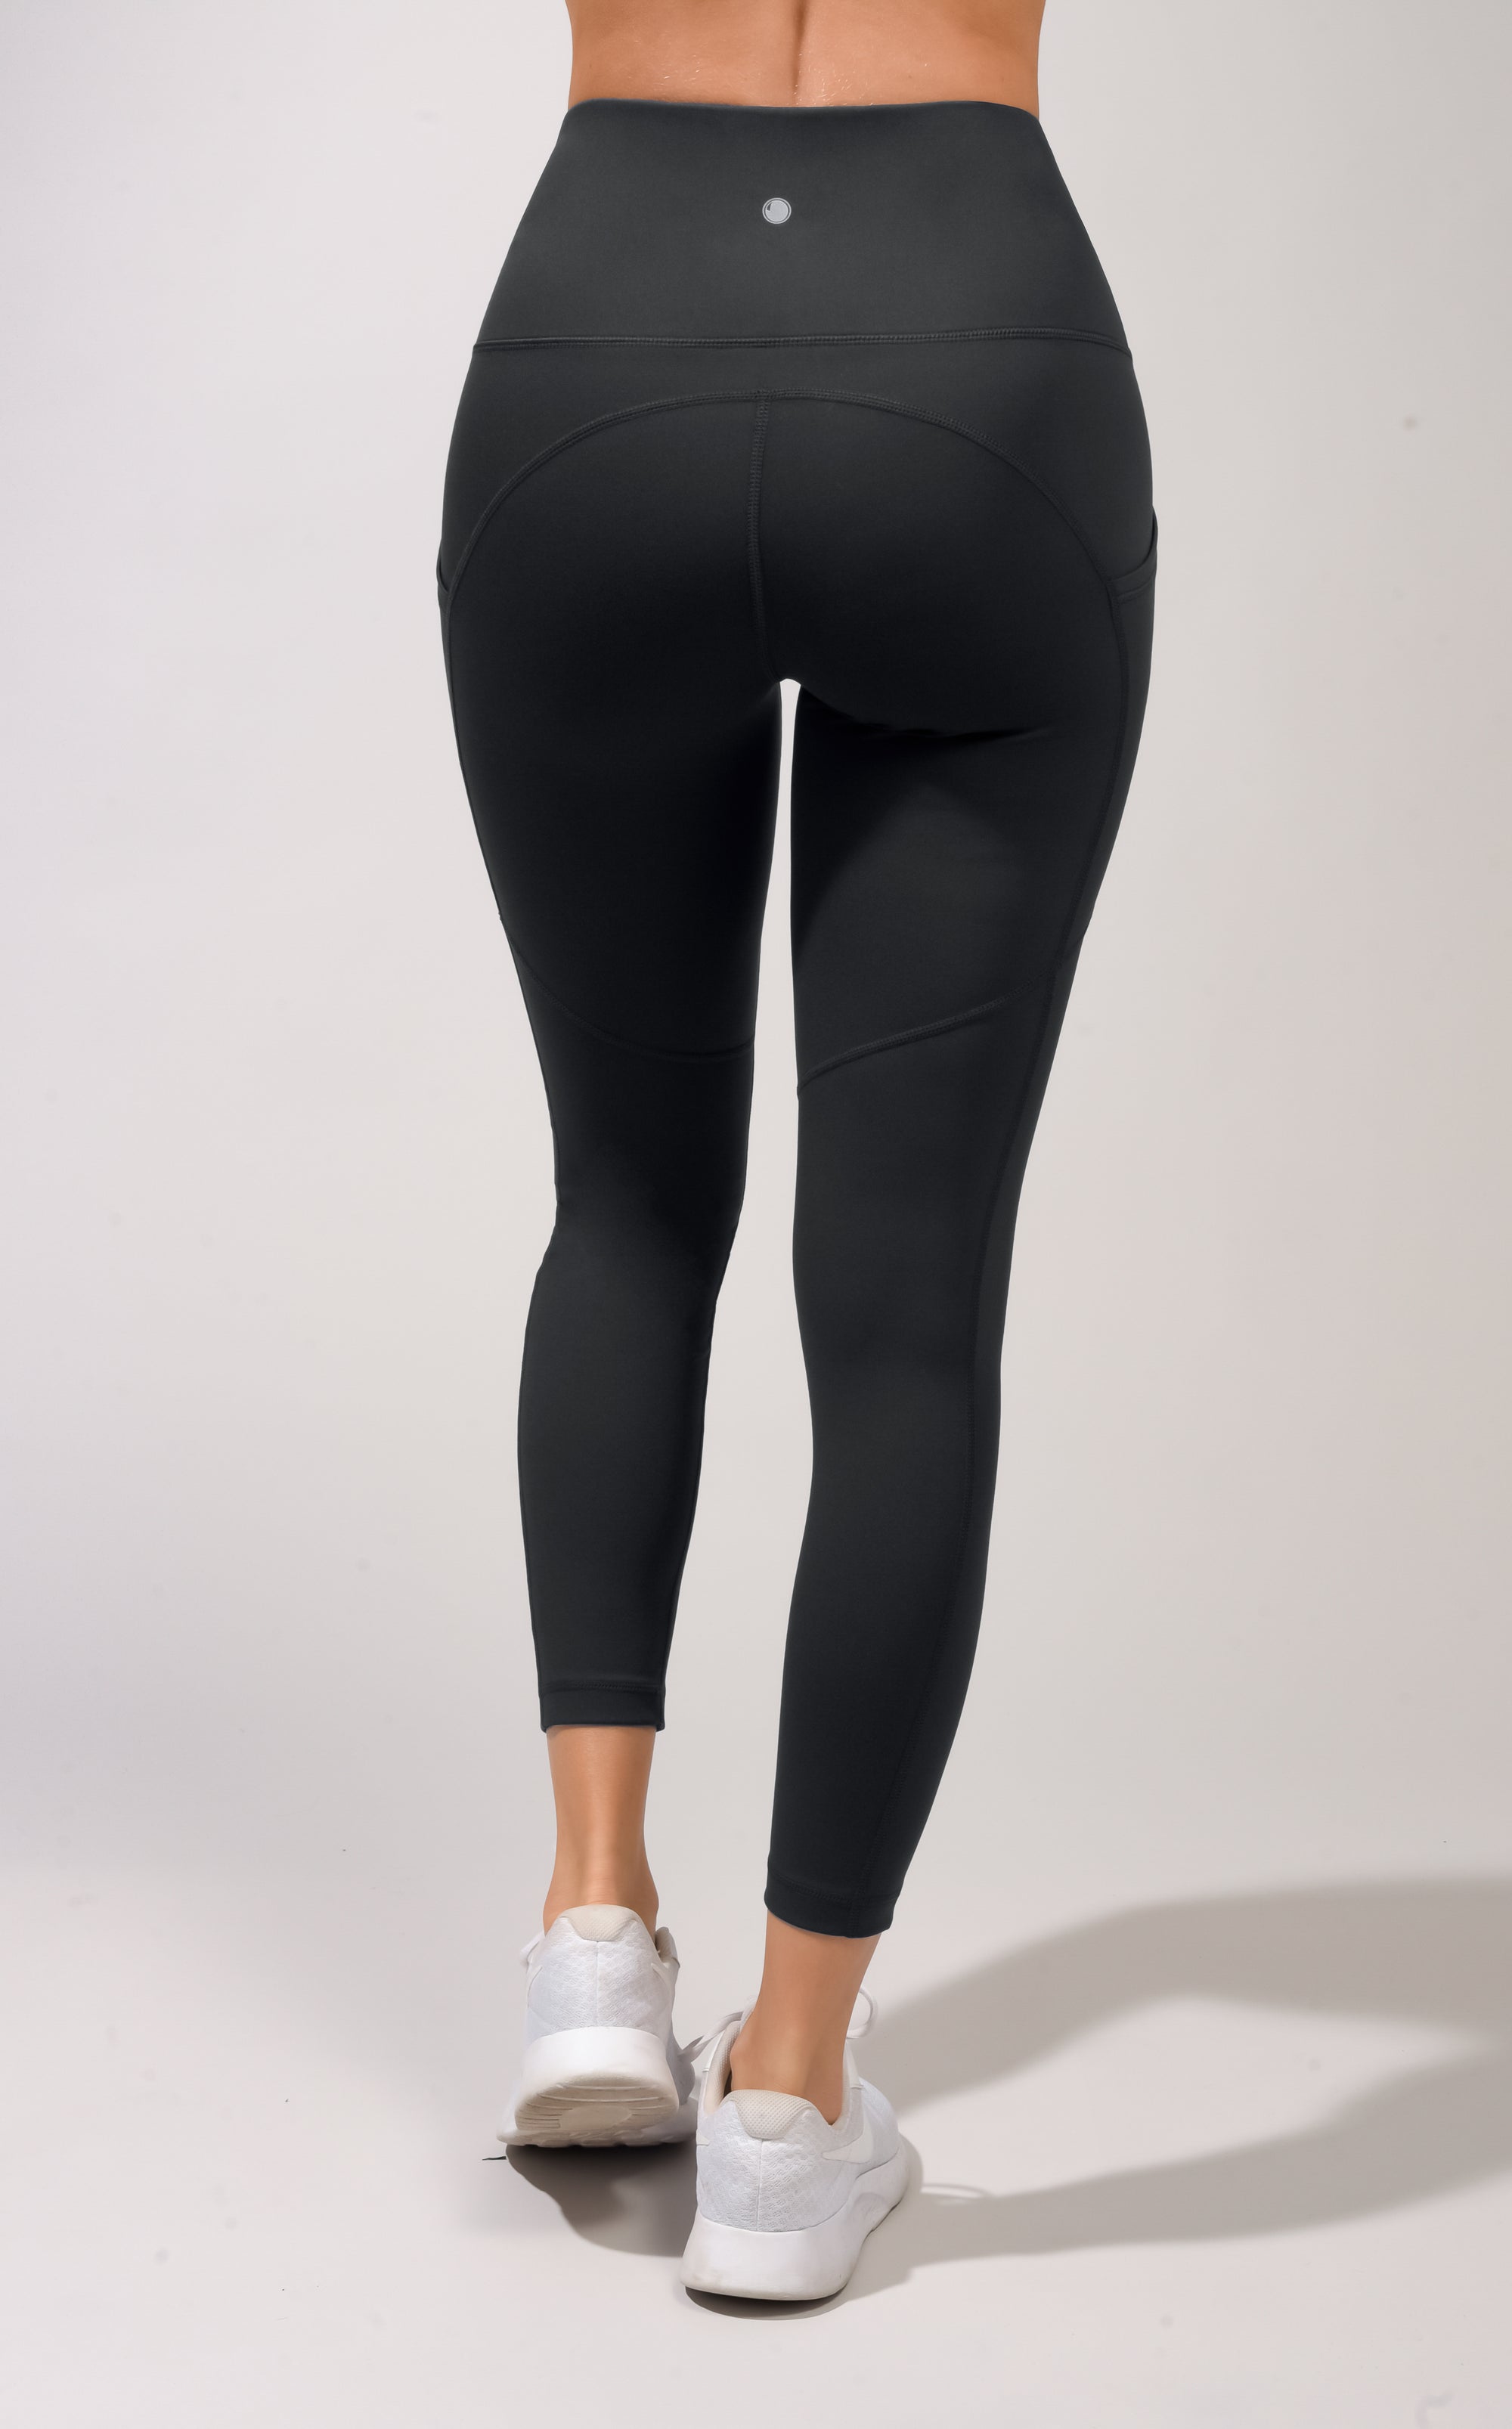 Yogalicious Lux black & white stretchy with pockets short leggings